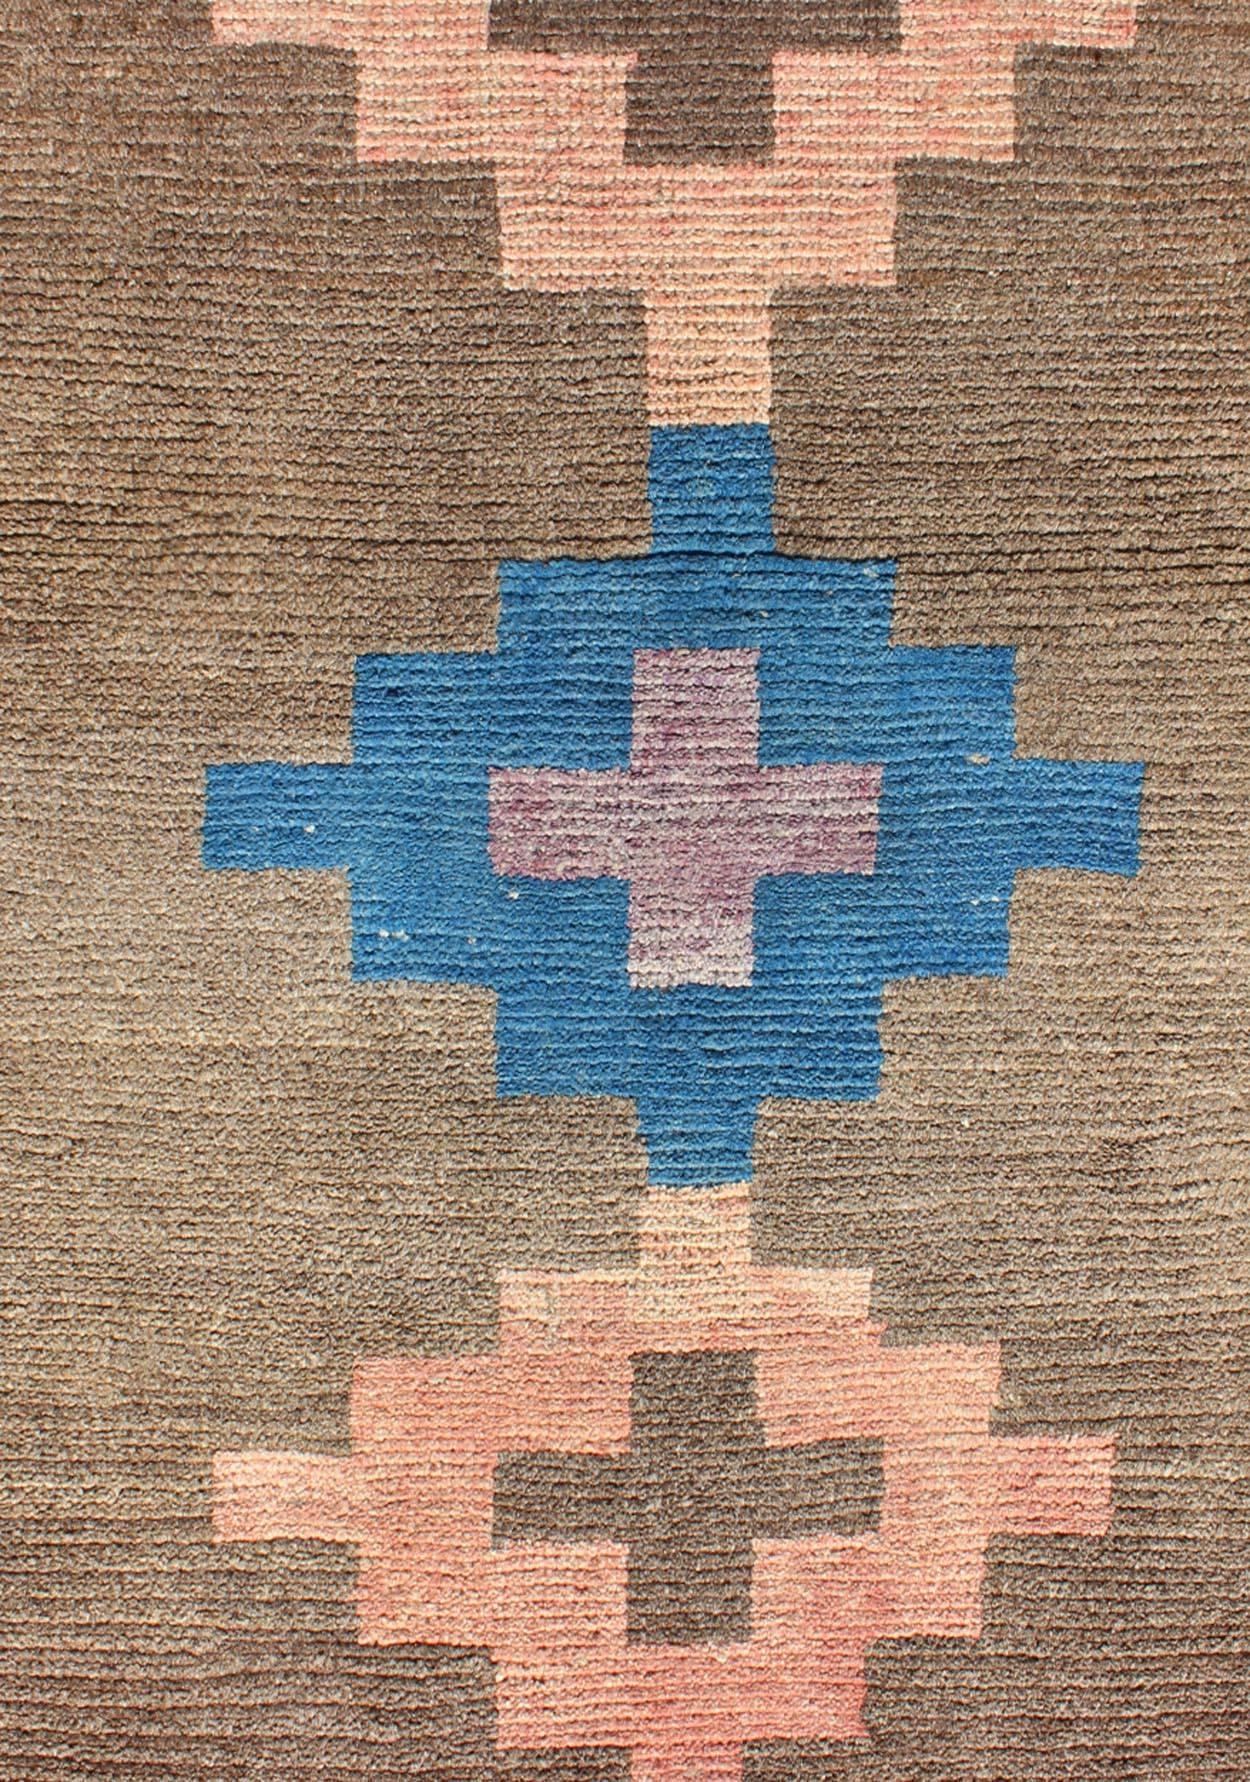 Vintage Turkish Tulu Runner with Tribal Design in Light Pink, Blue and Lavender In Excellent Condition For Sale In Atlanta, GA